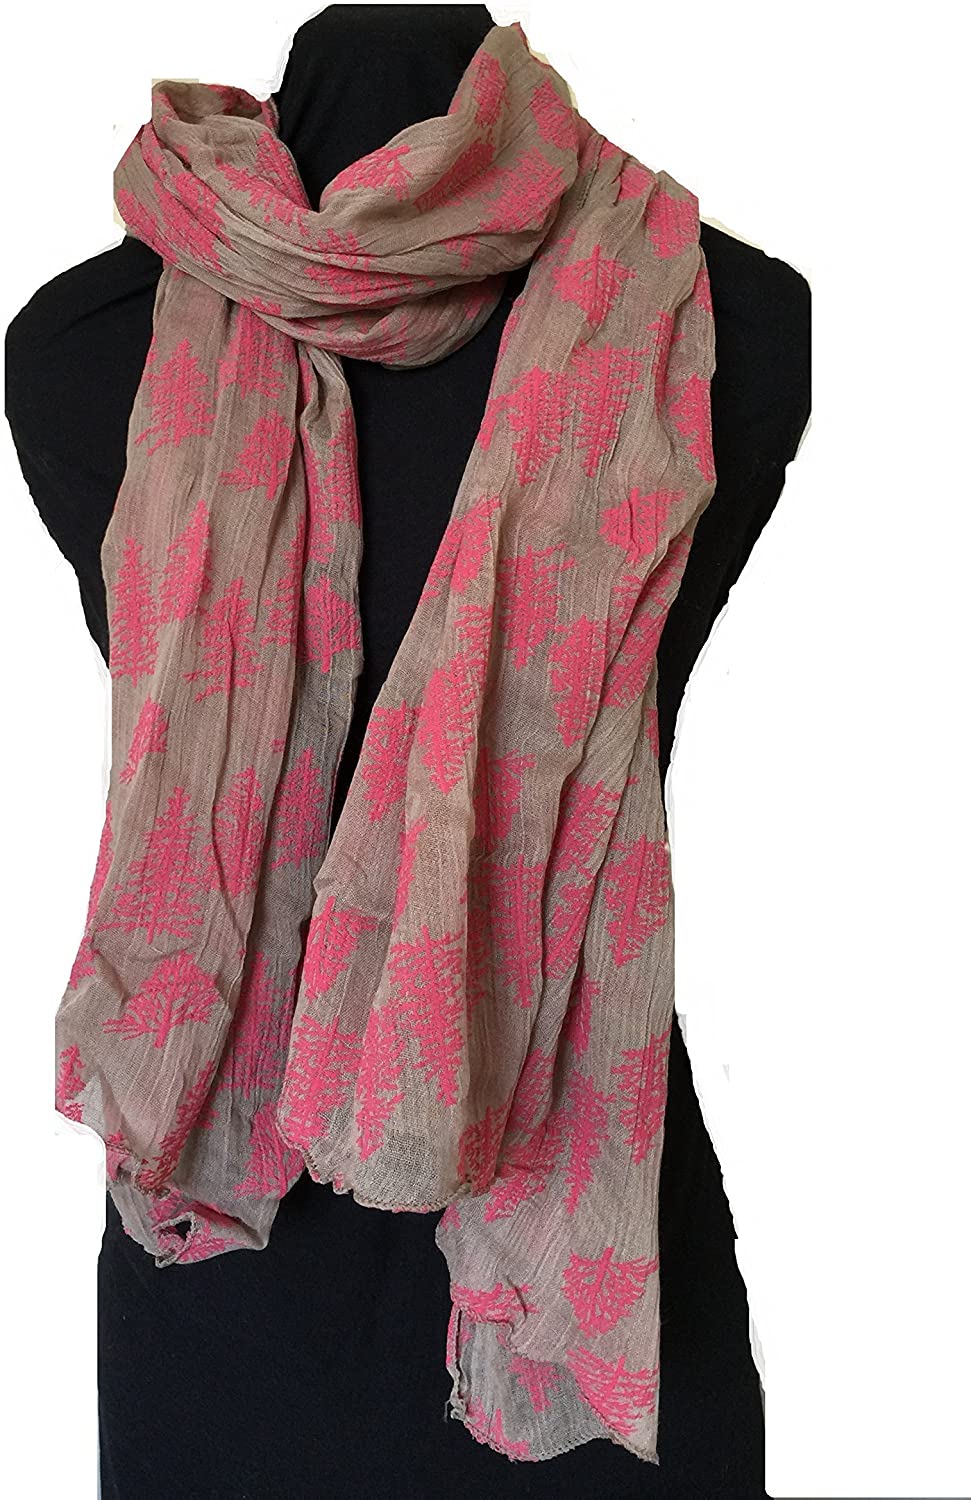 Pamper Yourself Now Beige with Pink Embossed Trees Design Scarf. Lovely Long Ladies Scarf